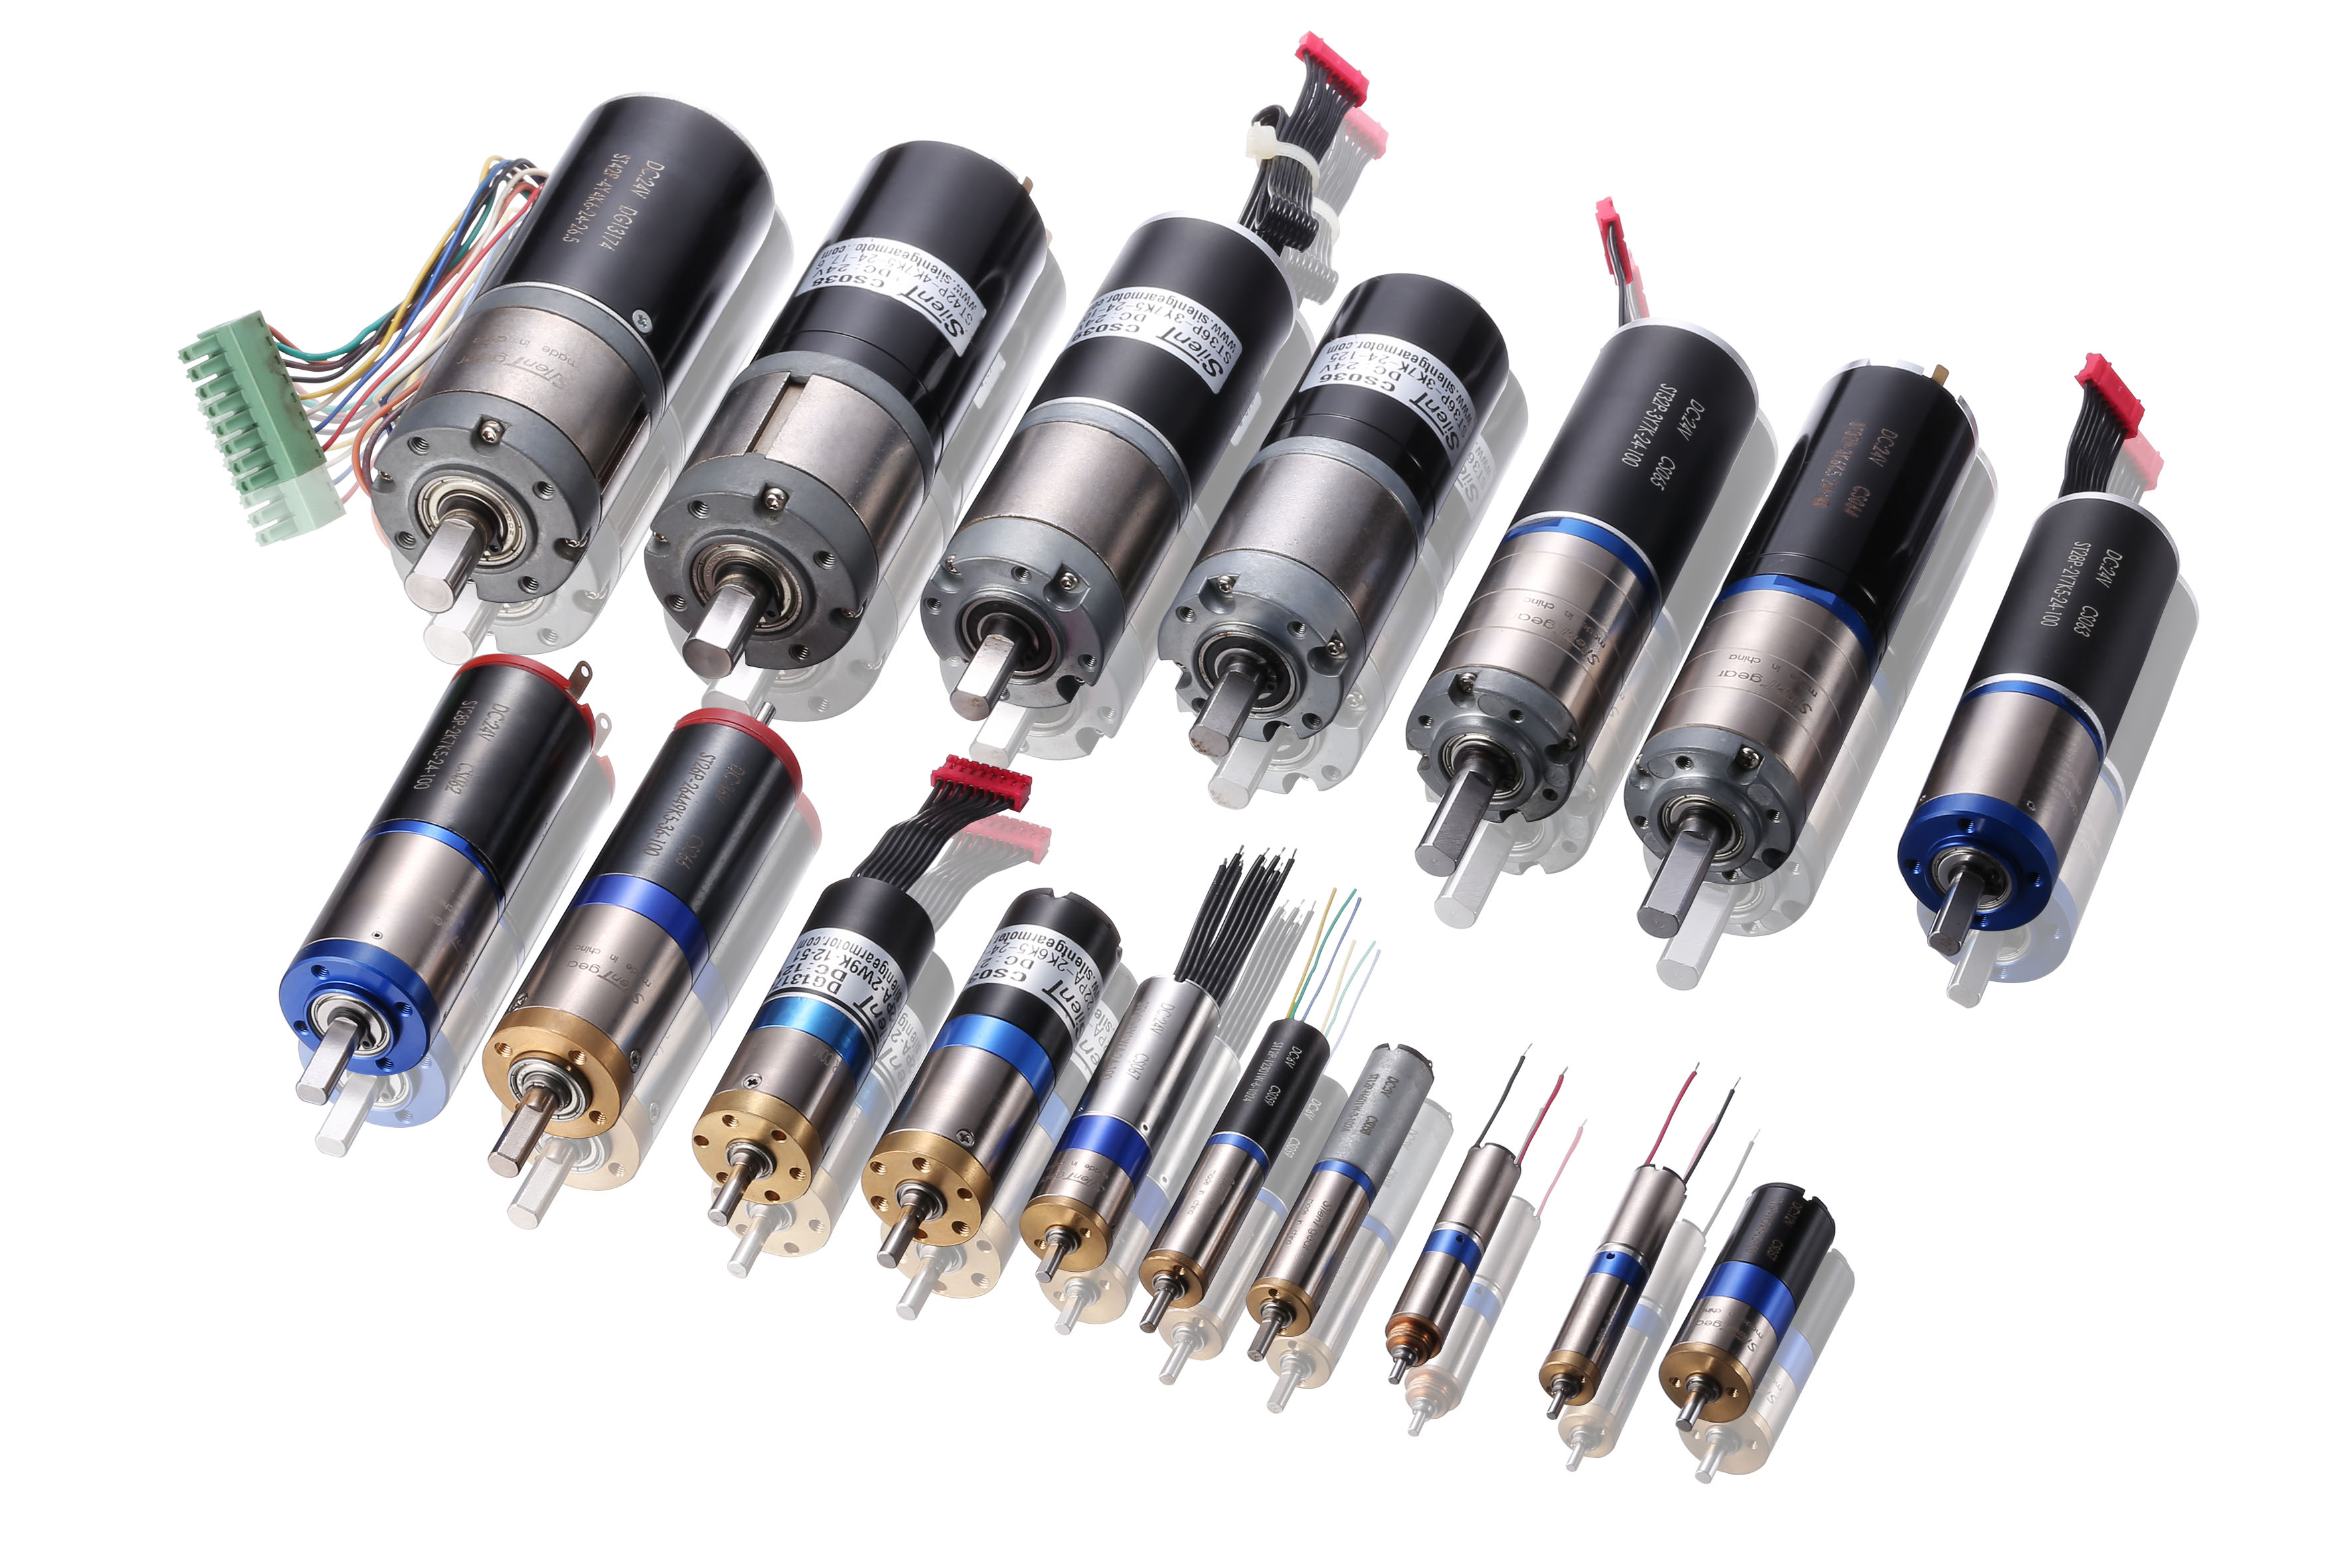 Advantages and disadvantages of DC motors with reducers